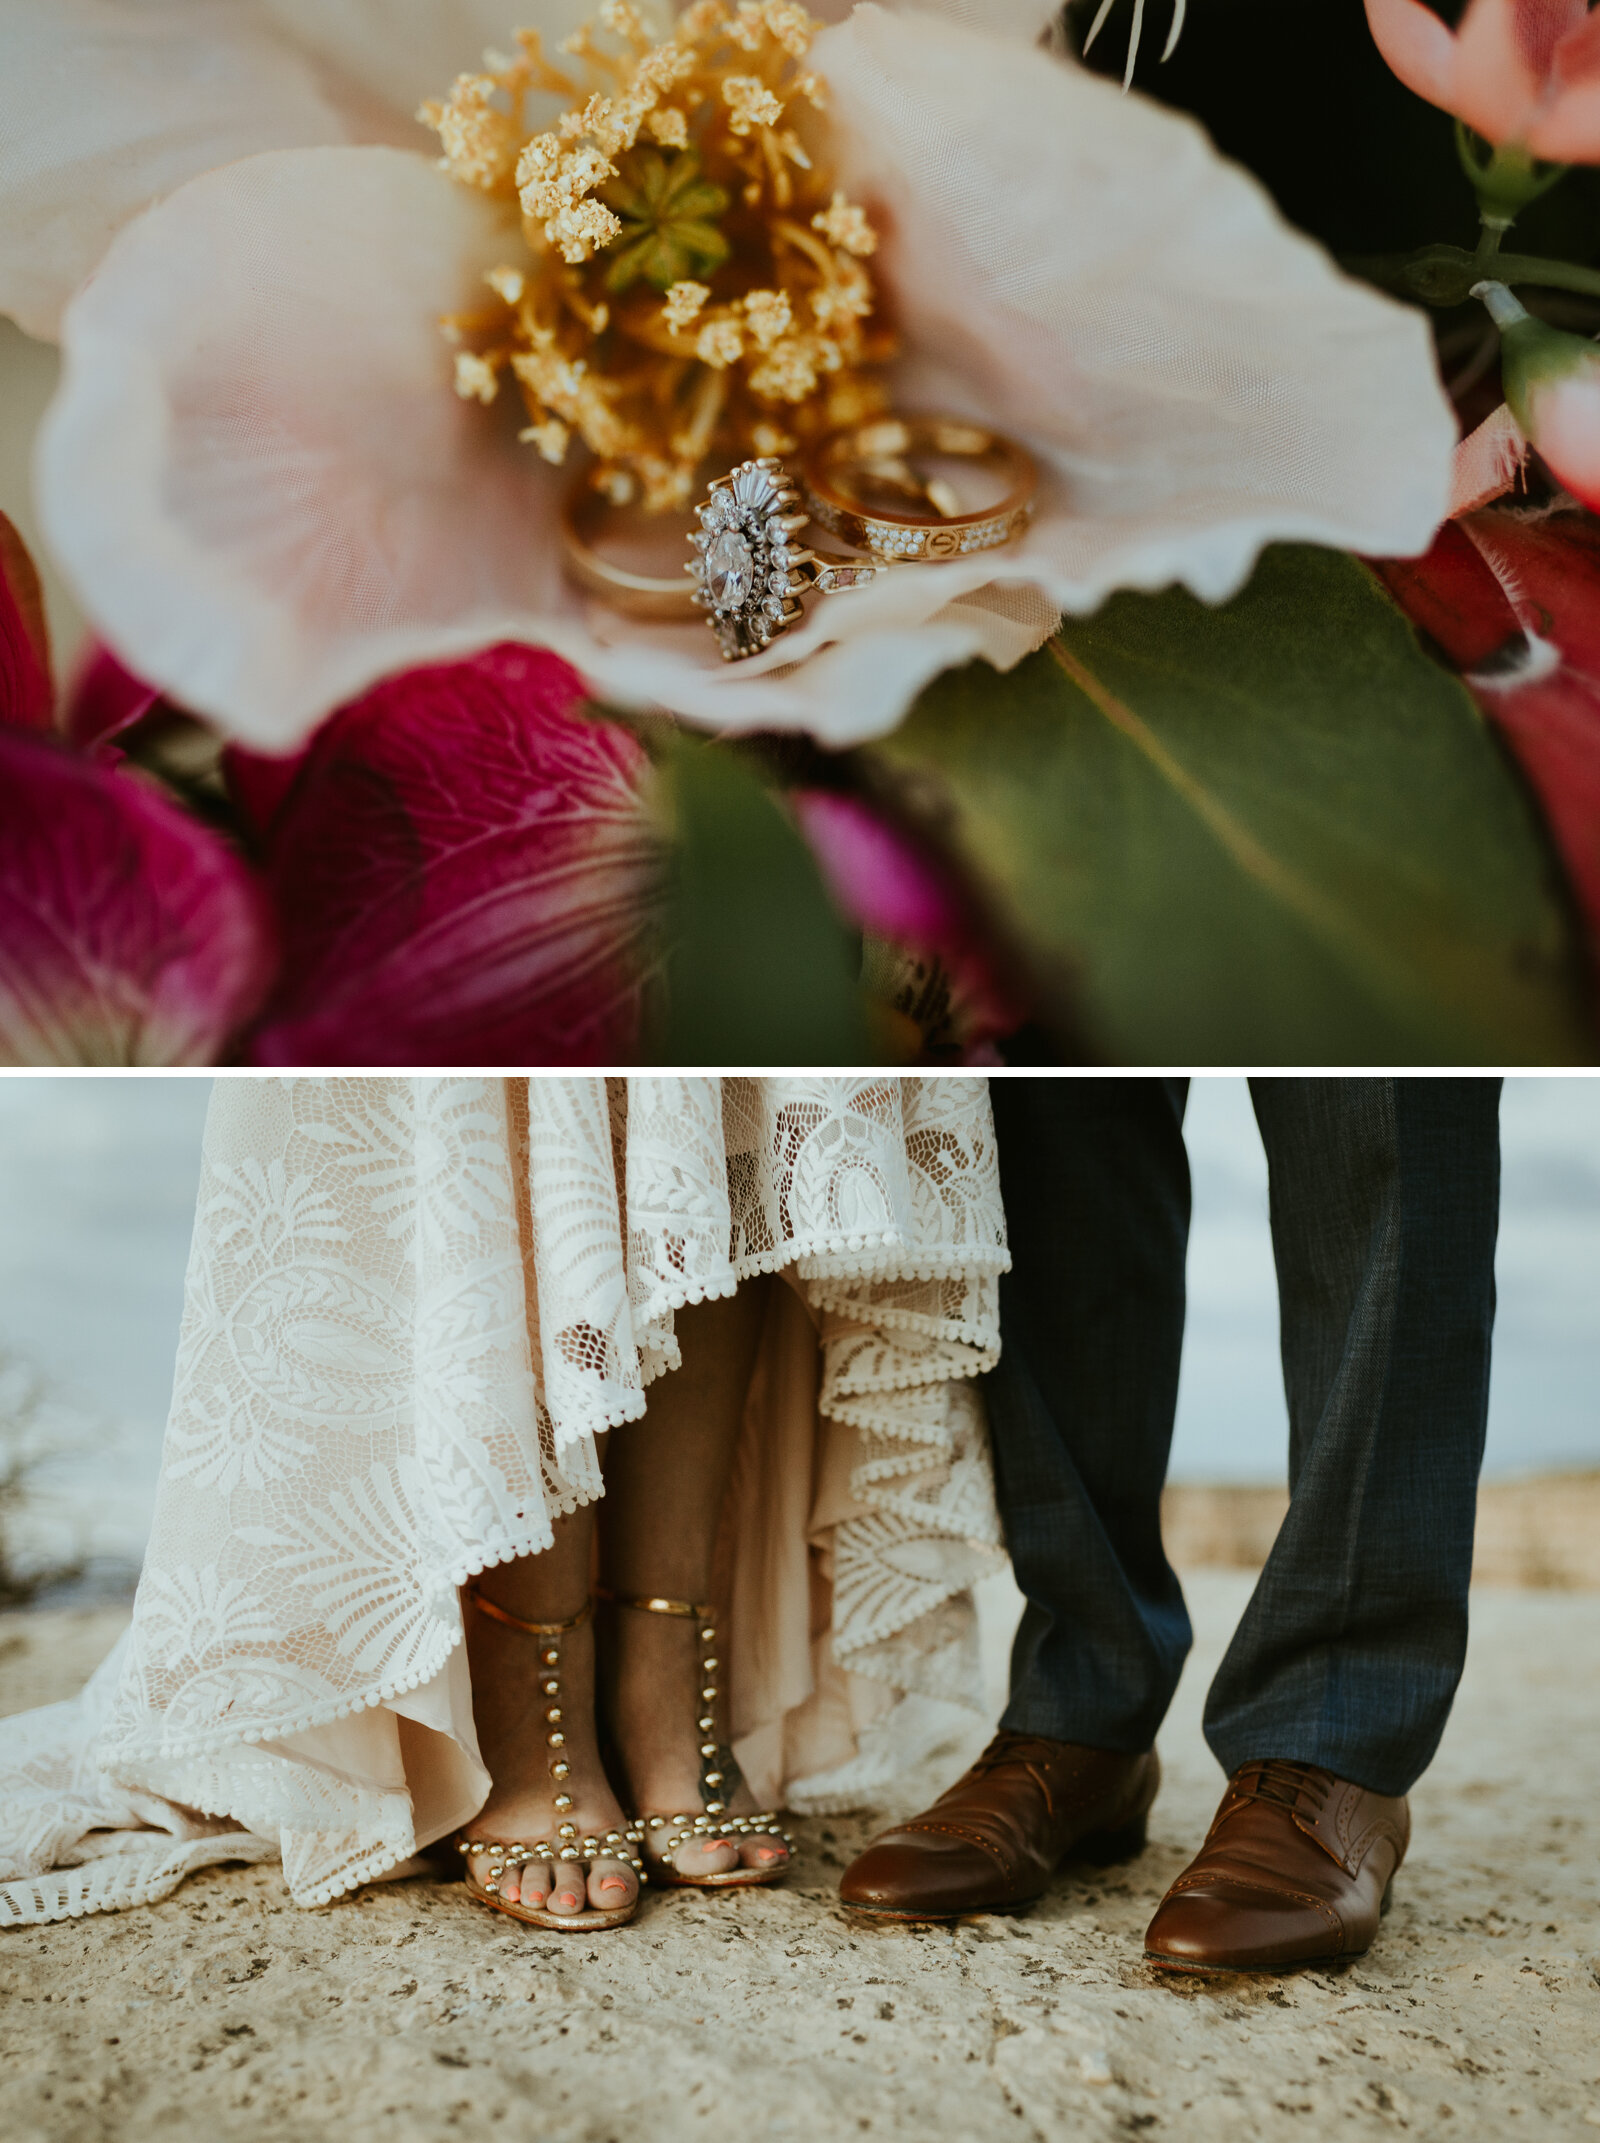 moran point grand canyon national park arizona elopement photography bibiluxe dress with fringe tassels boho bride inspiration boho wedding style inspo lack of color hat bridal hat bride and groom posing ideas romantic elopement detail pictures.jpg